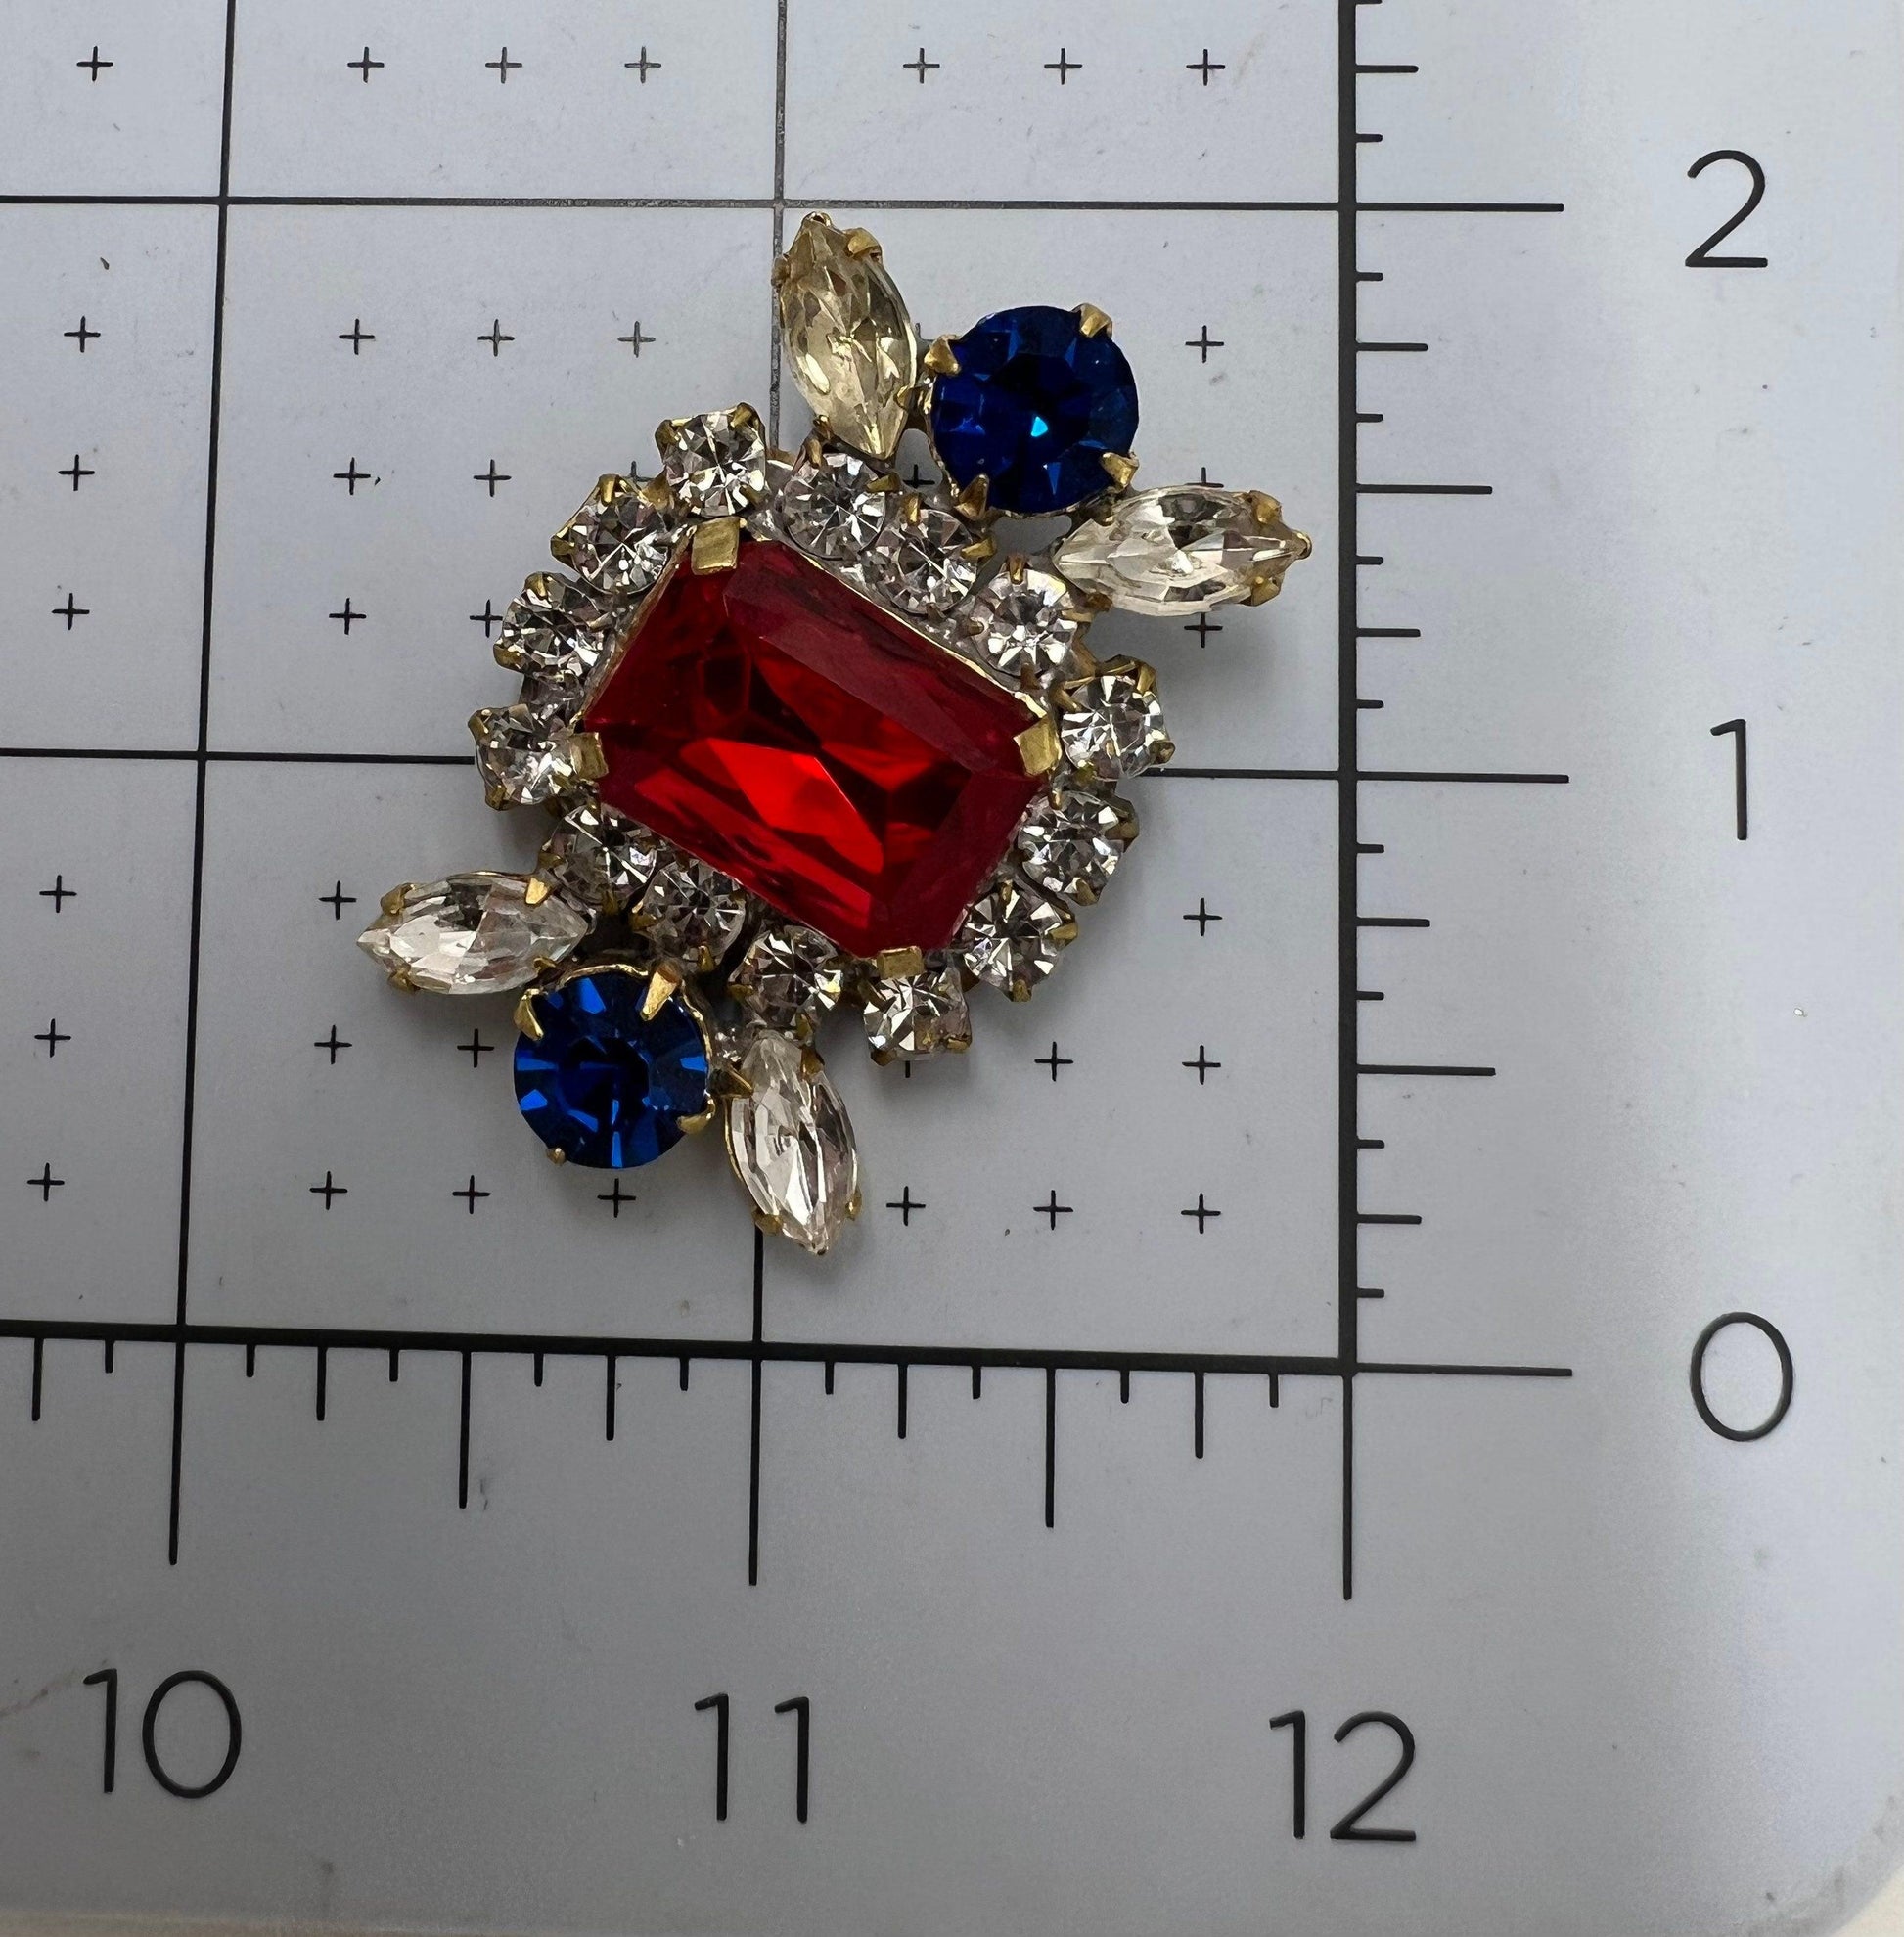 Large fancy Crystal button embellishment with Czech glass for sewing on an elegant cardigan, cocktail dress, or decorations for home